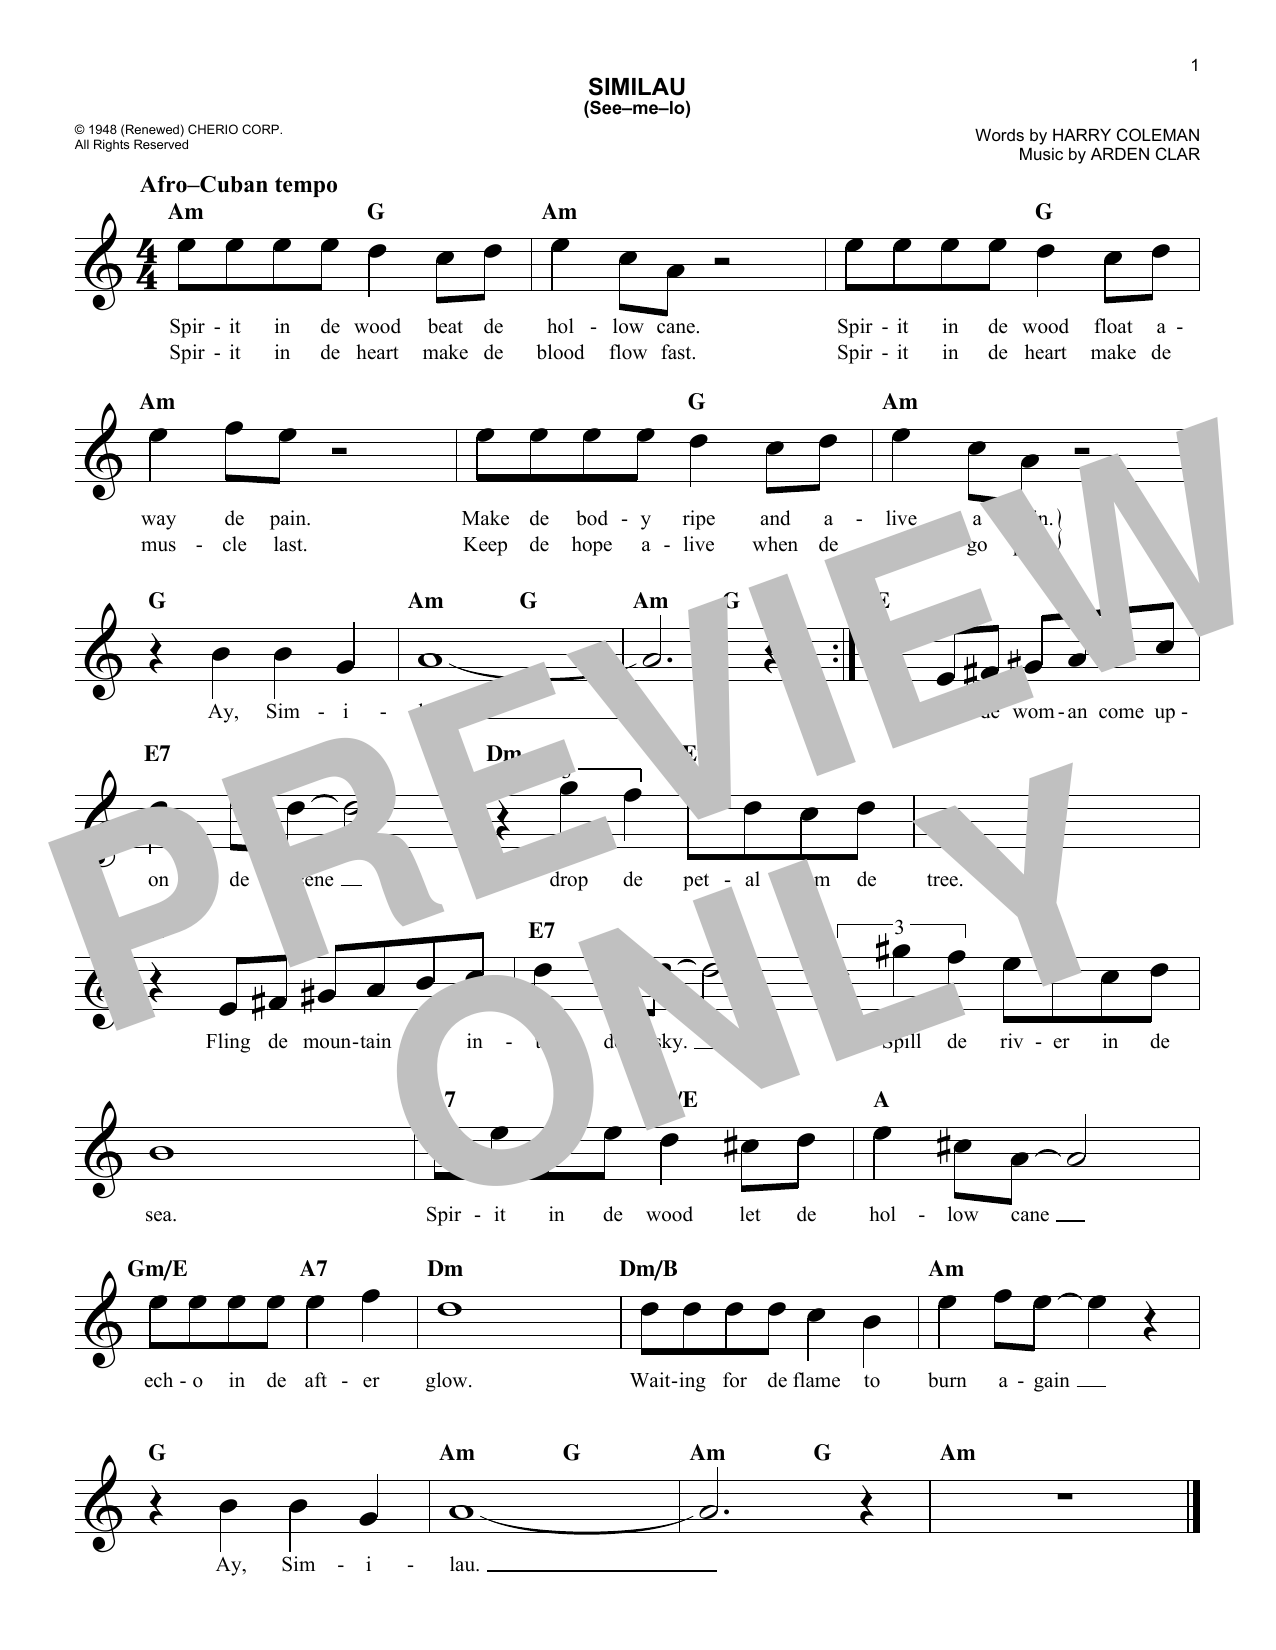 Download Peggy Lee Similau (See-me-lo) Sheet Music